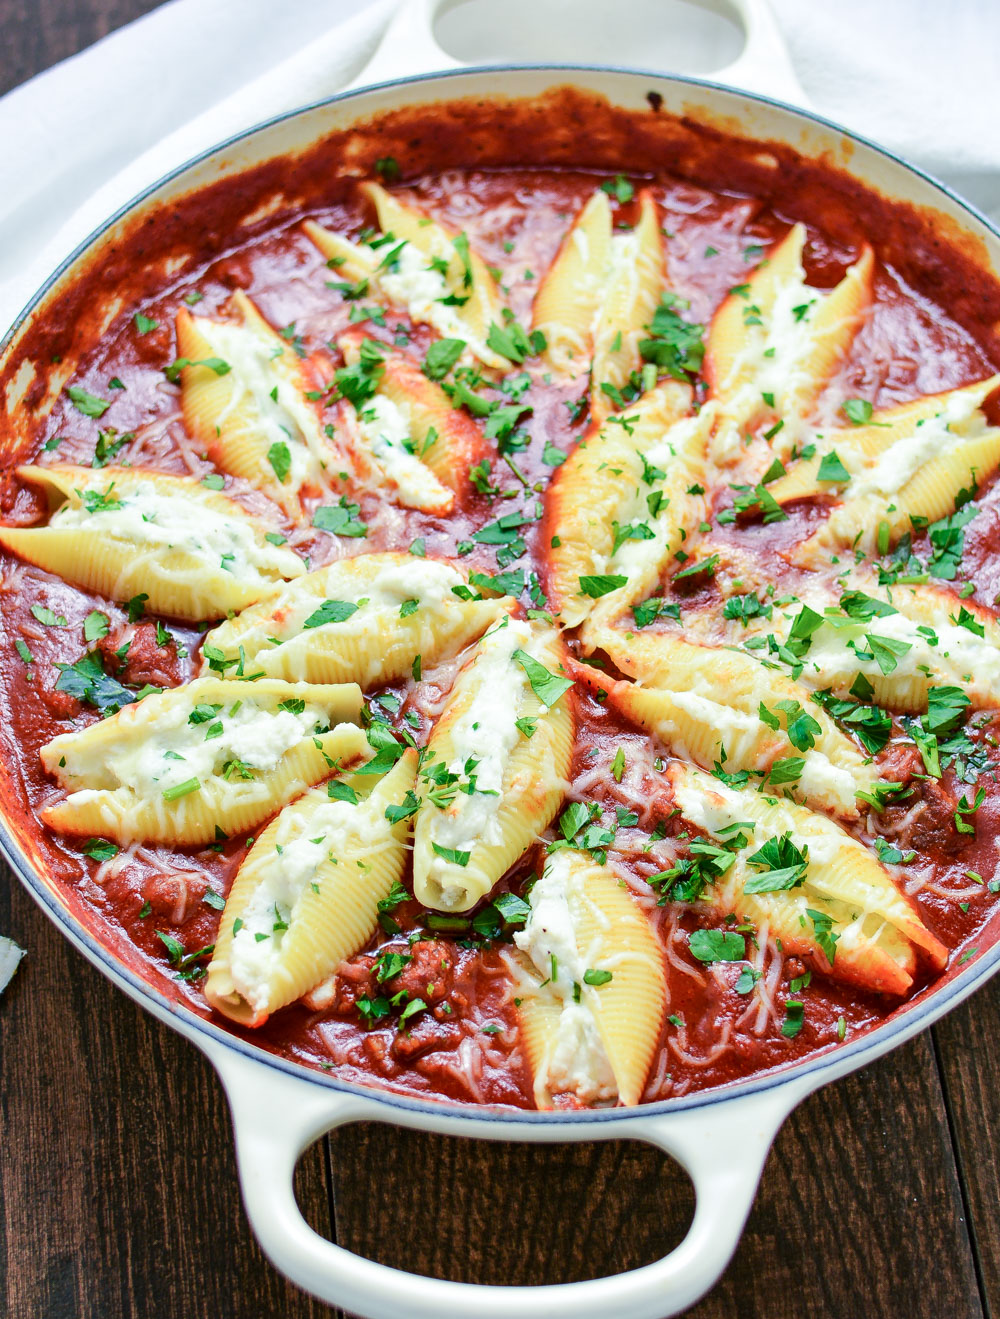 Skillet Stuffed Shells are a simple and delicious weeknight dinner recipe!